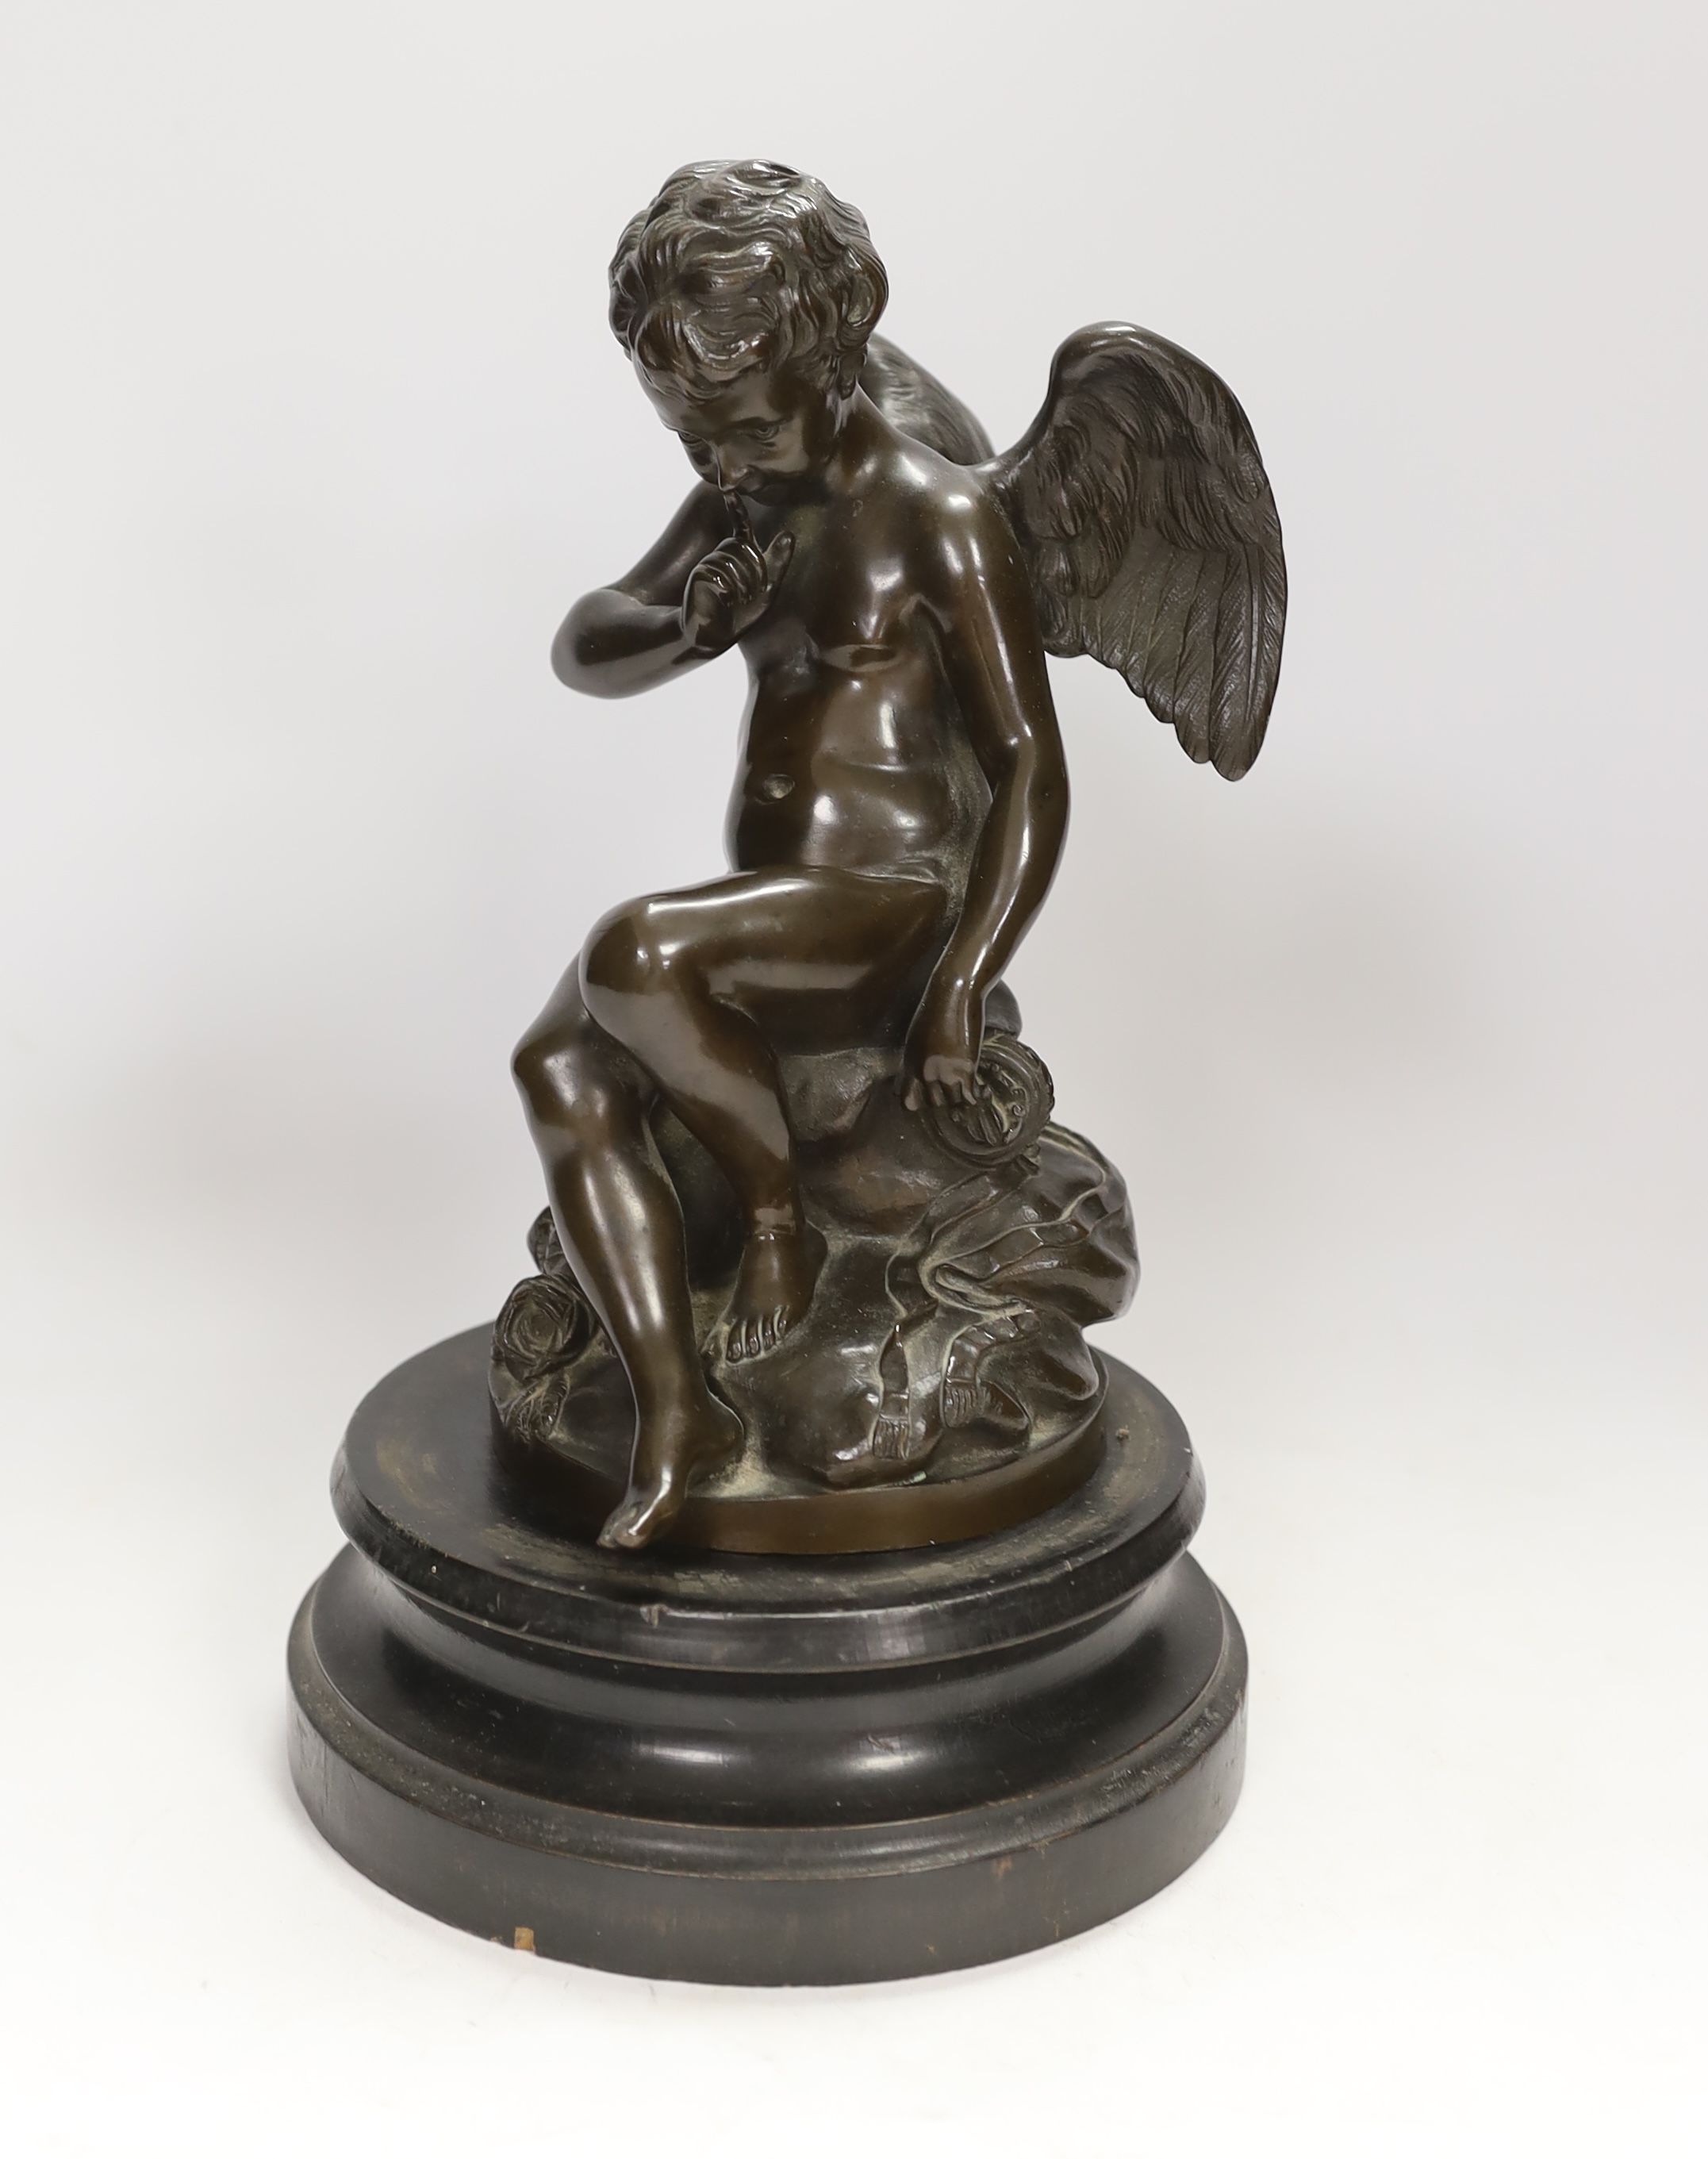 After Etienne Maurice Falconet (French, 1716-1791), a cast bronze of Cupid, ‘L’Amour Menacant, on hardwood stand, overall 28cm. Condition - good